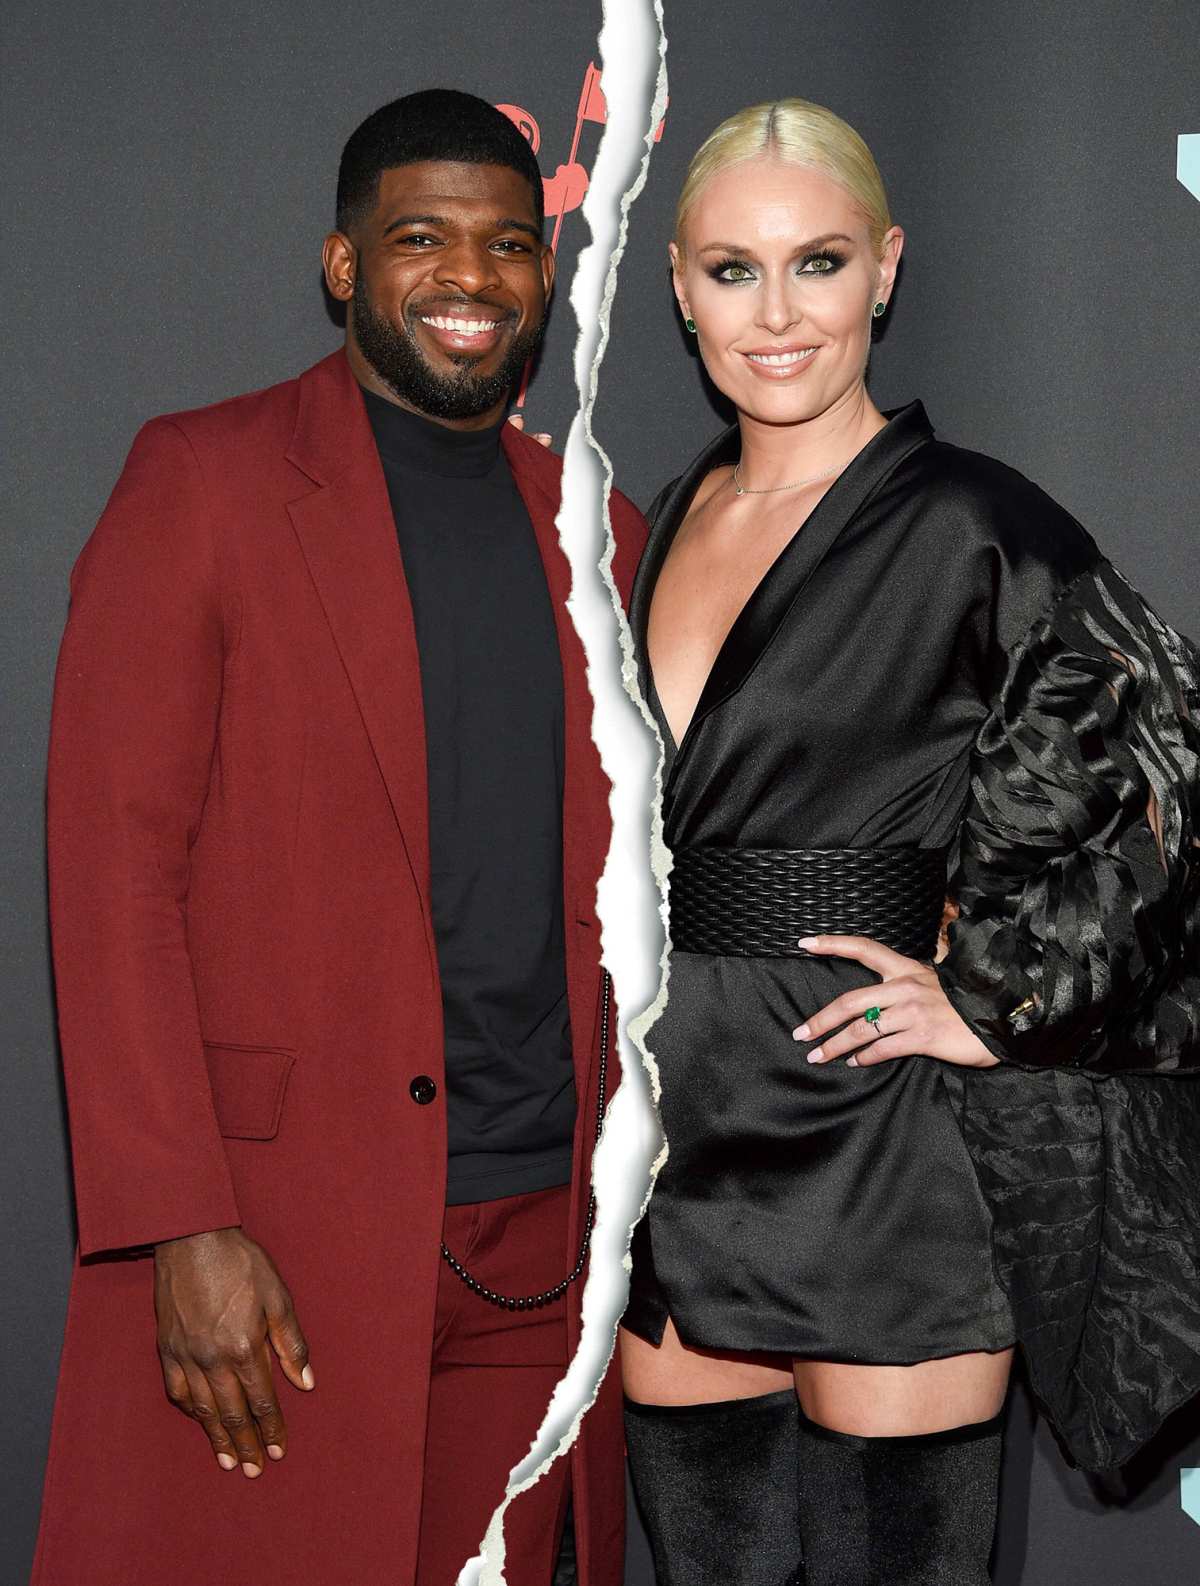 Awkward Details About Lindsey Vonn And P.K. Subban's Relationship